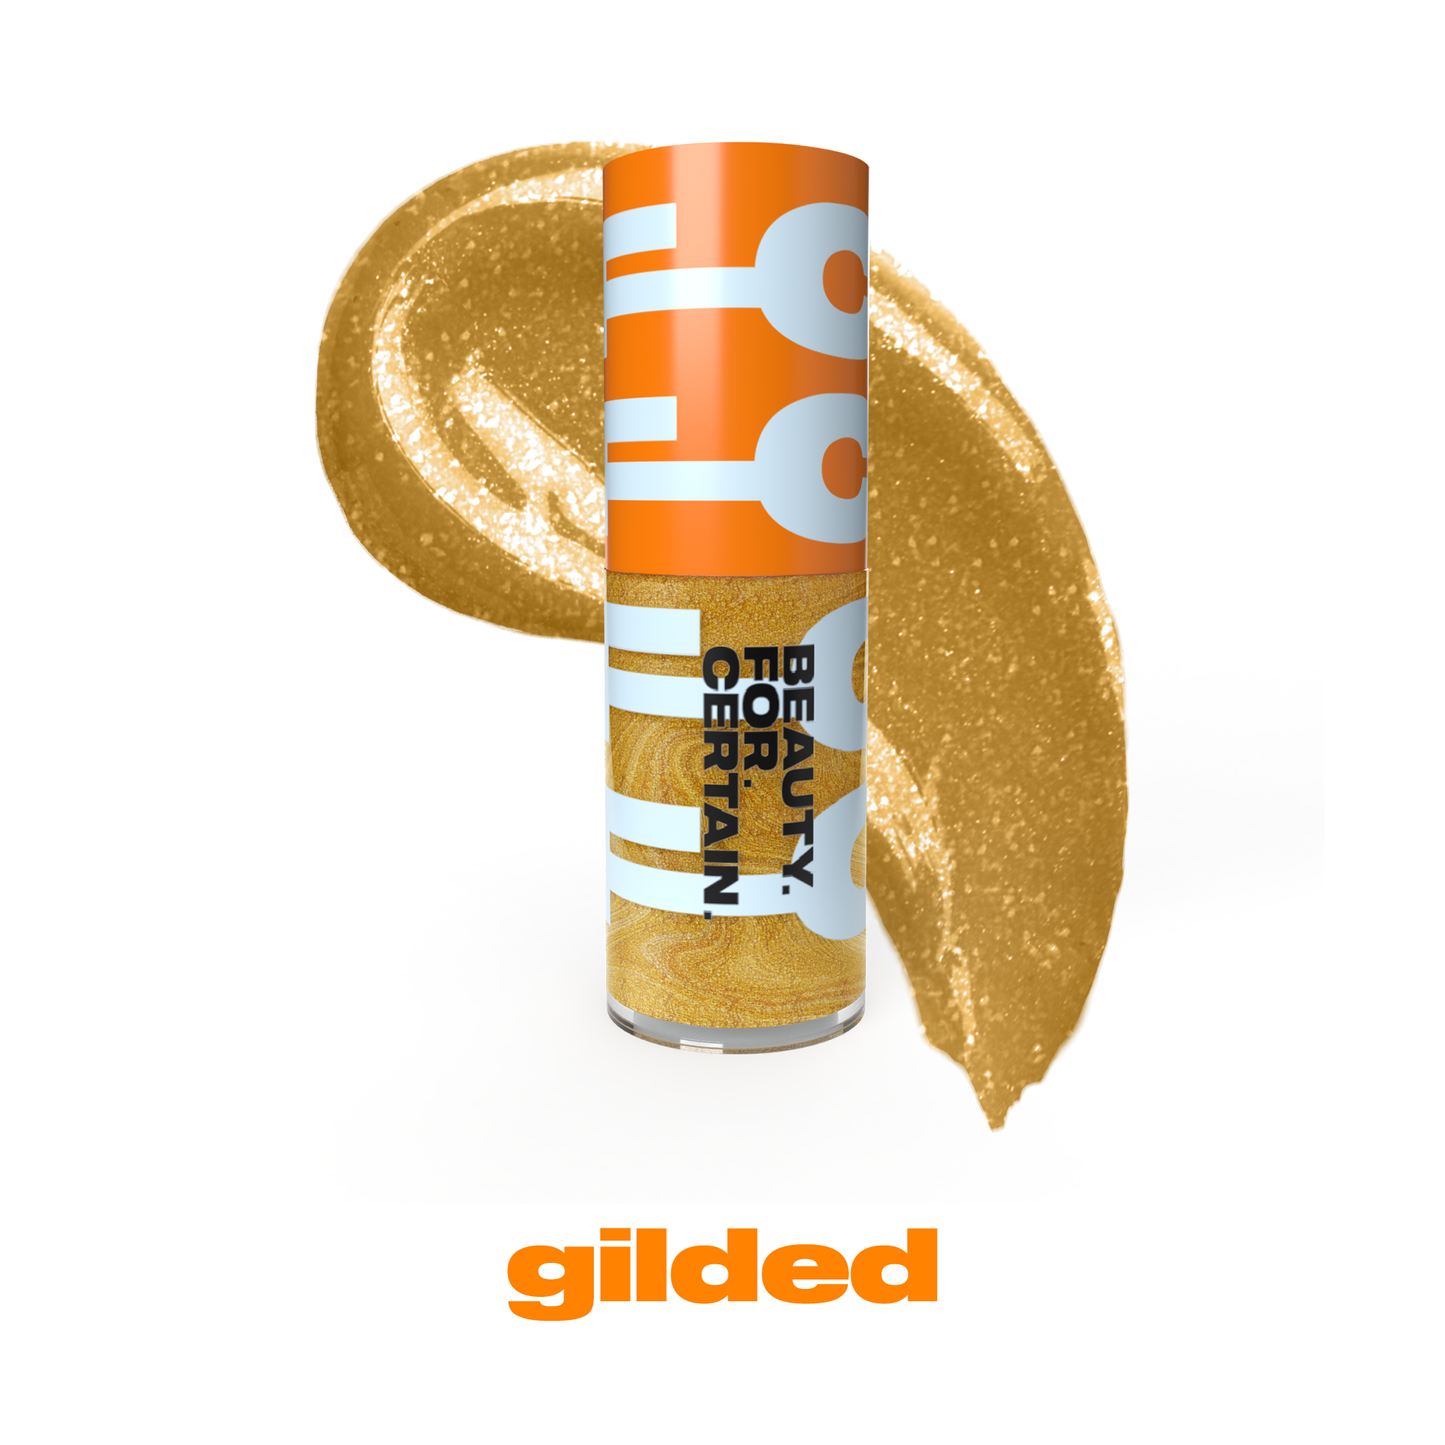 high-pigment gloss | gilded